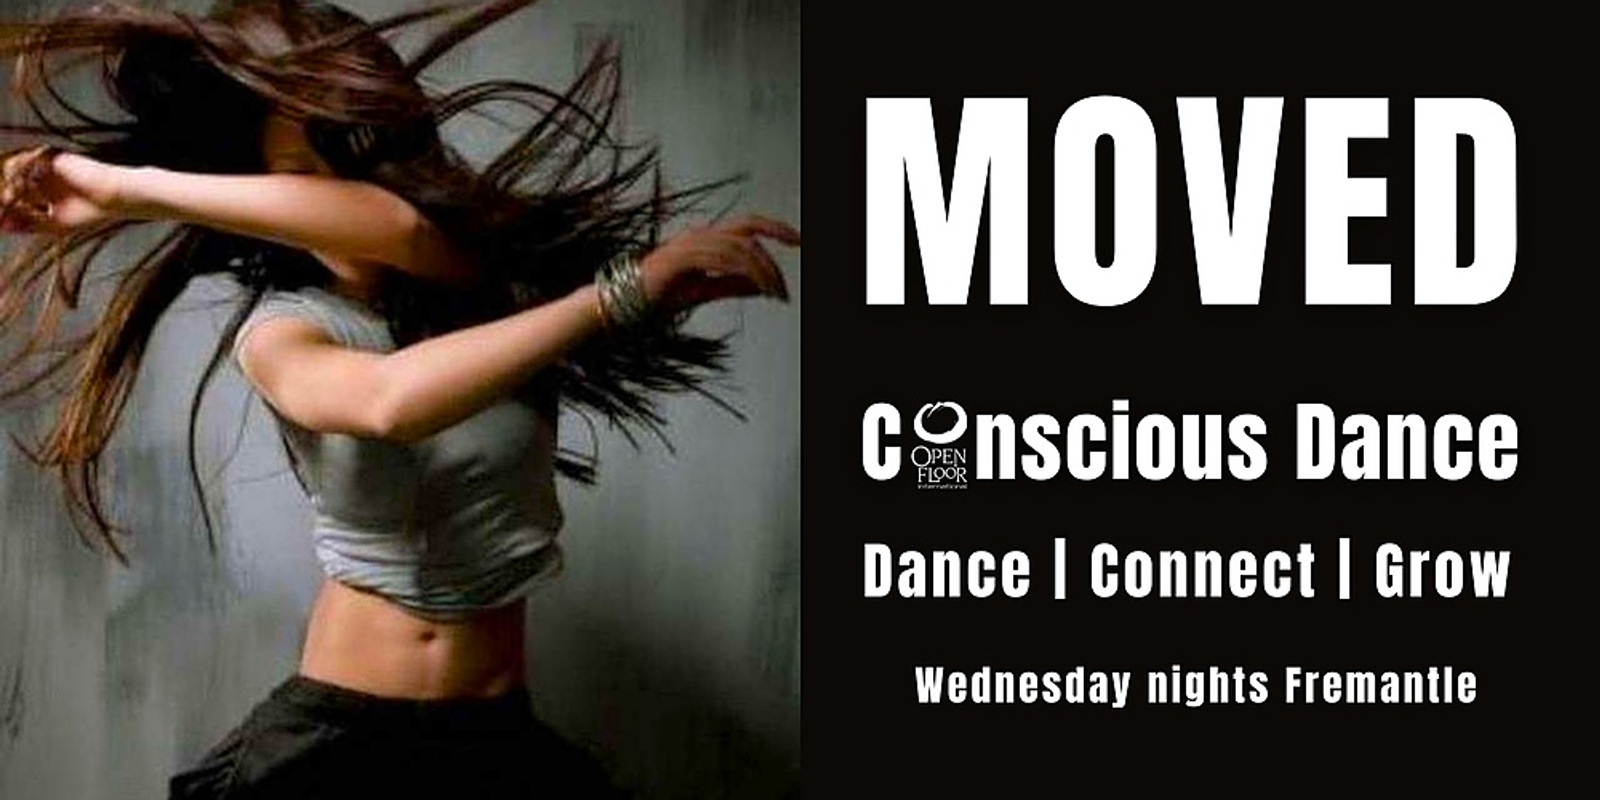 Banner image for MOVED - Conscious Dance - May 31st